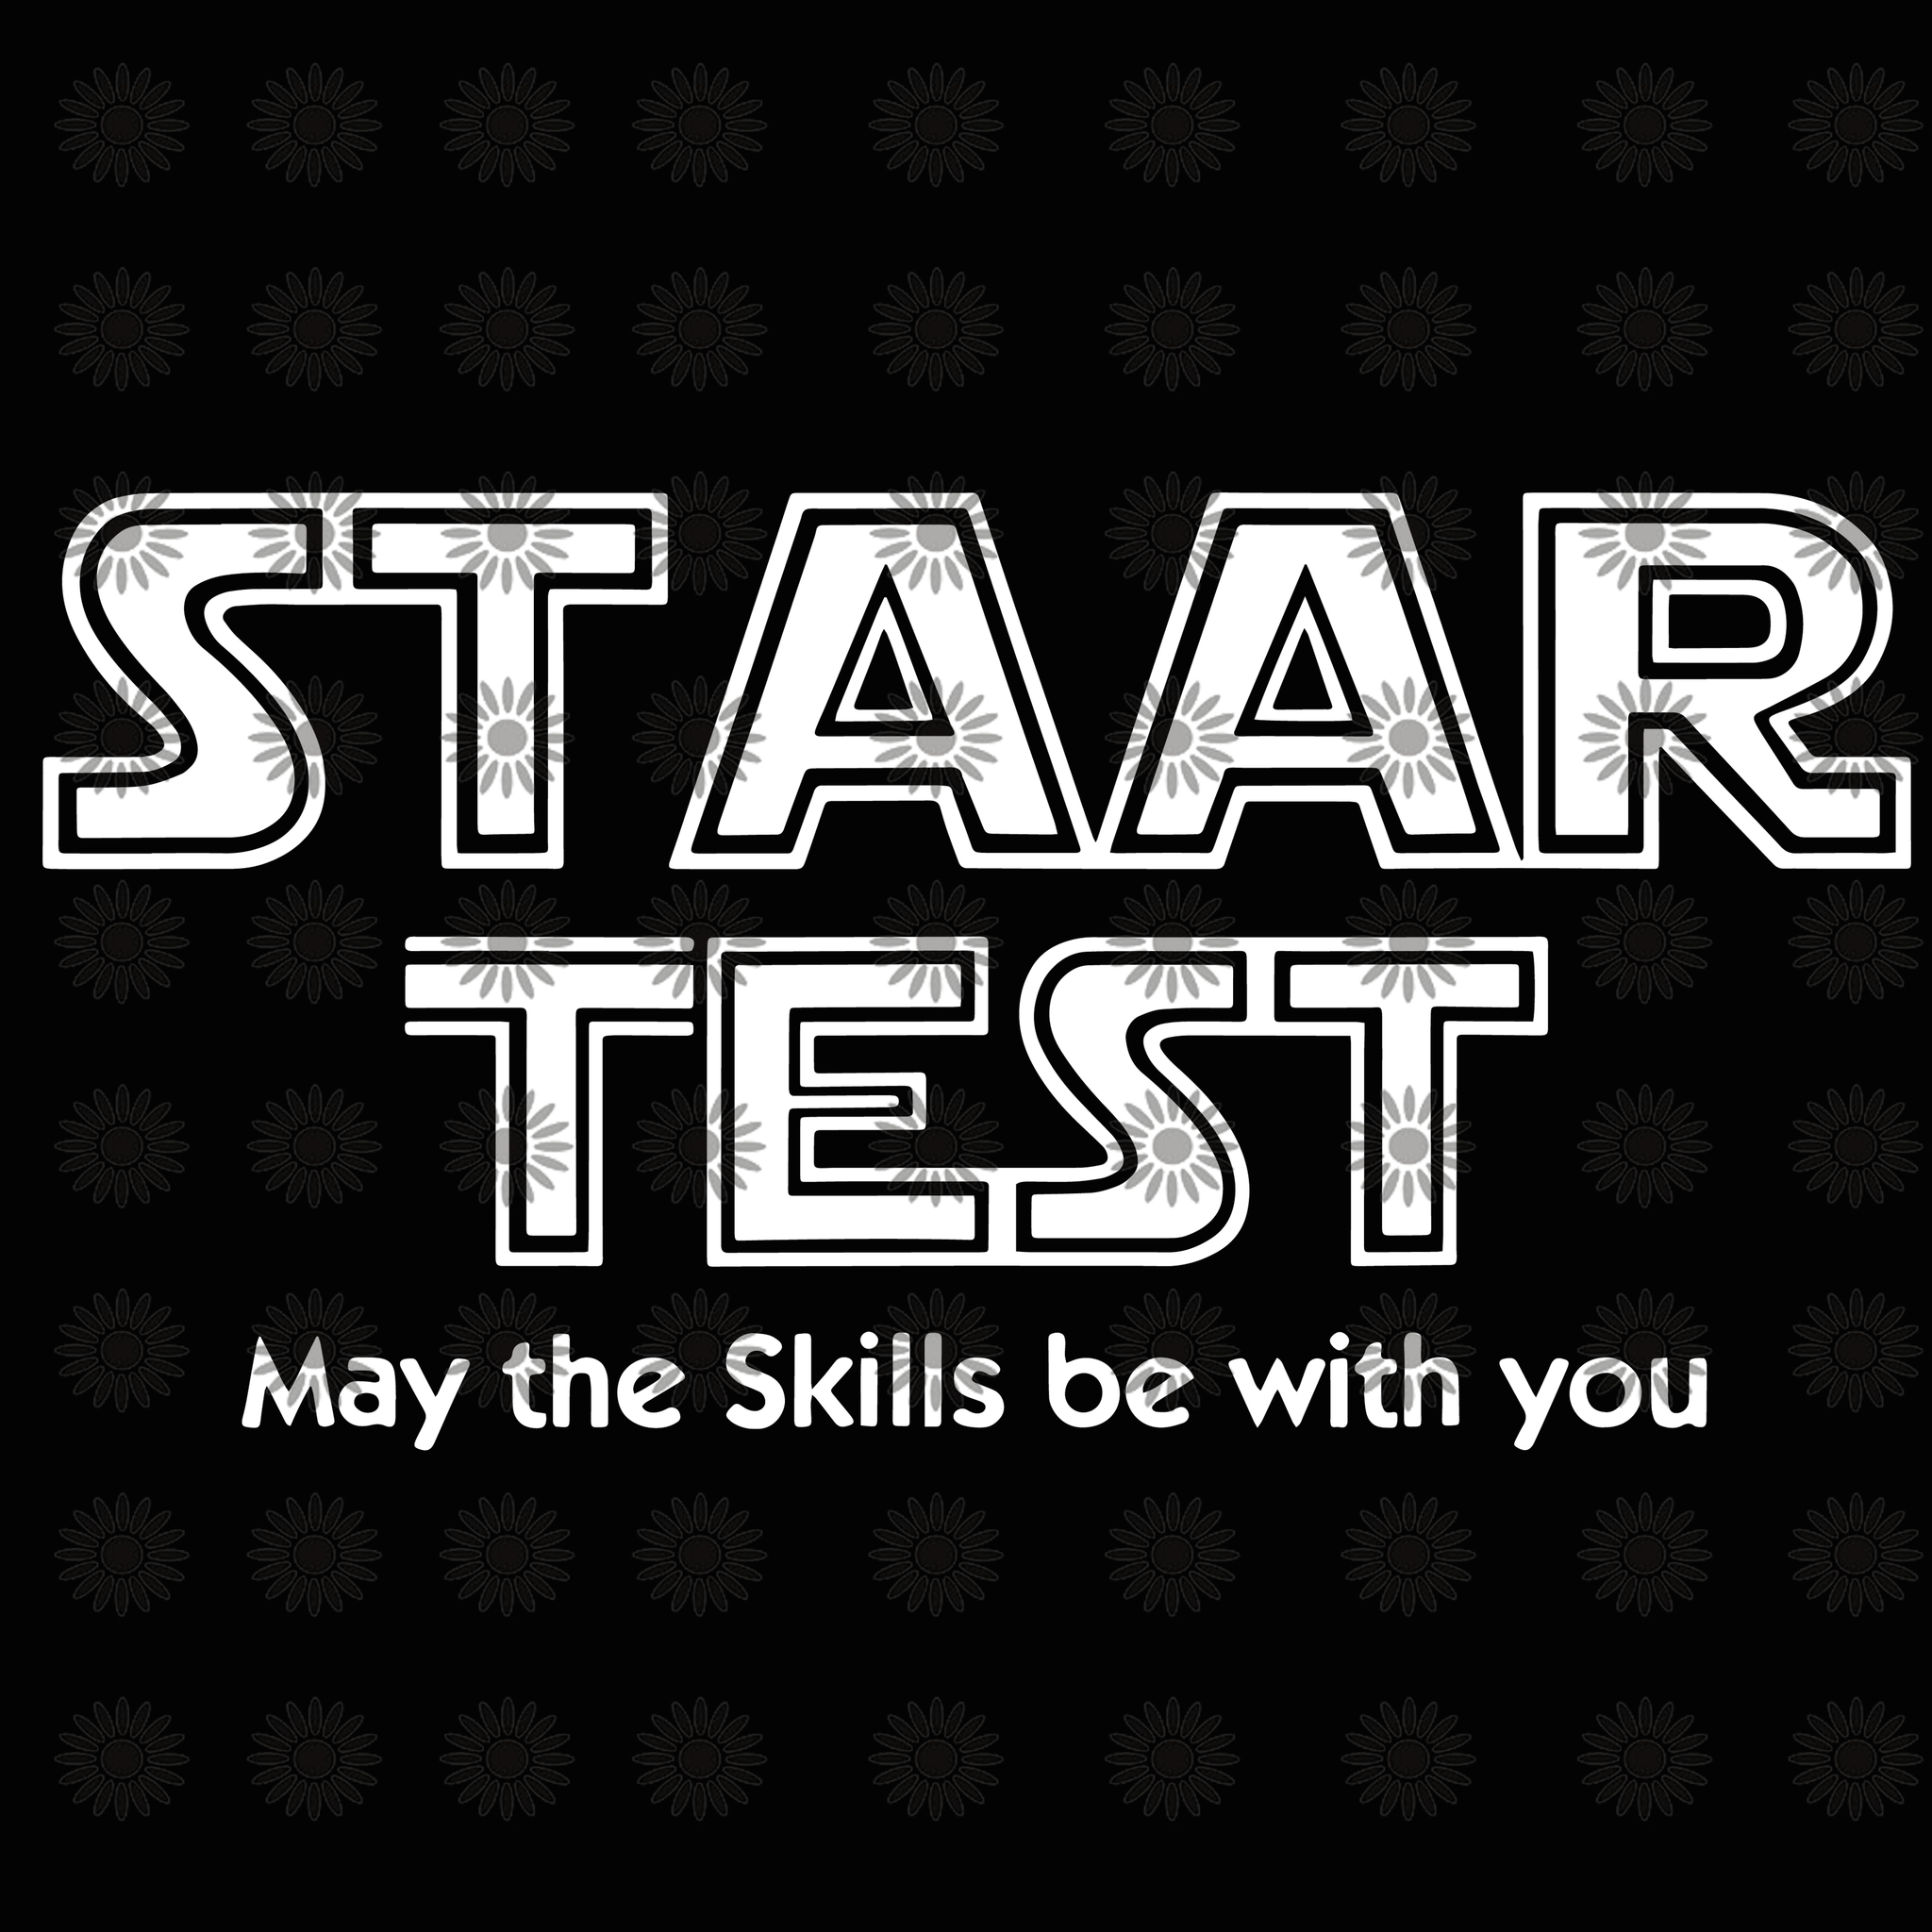 Staar test may the skills be with you svg, Staar test may the skills be with you, funny quotes svg, png, eps, dxf file